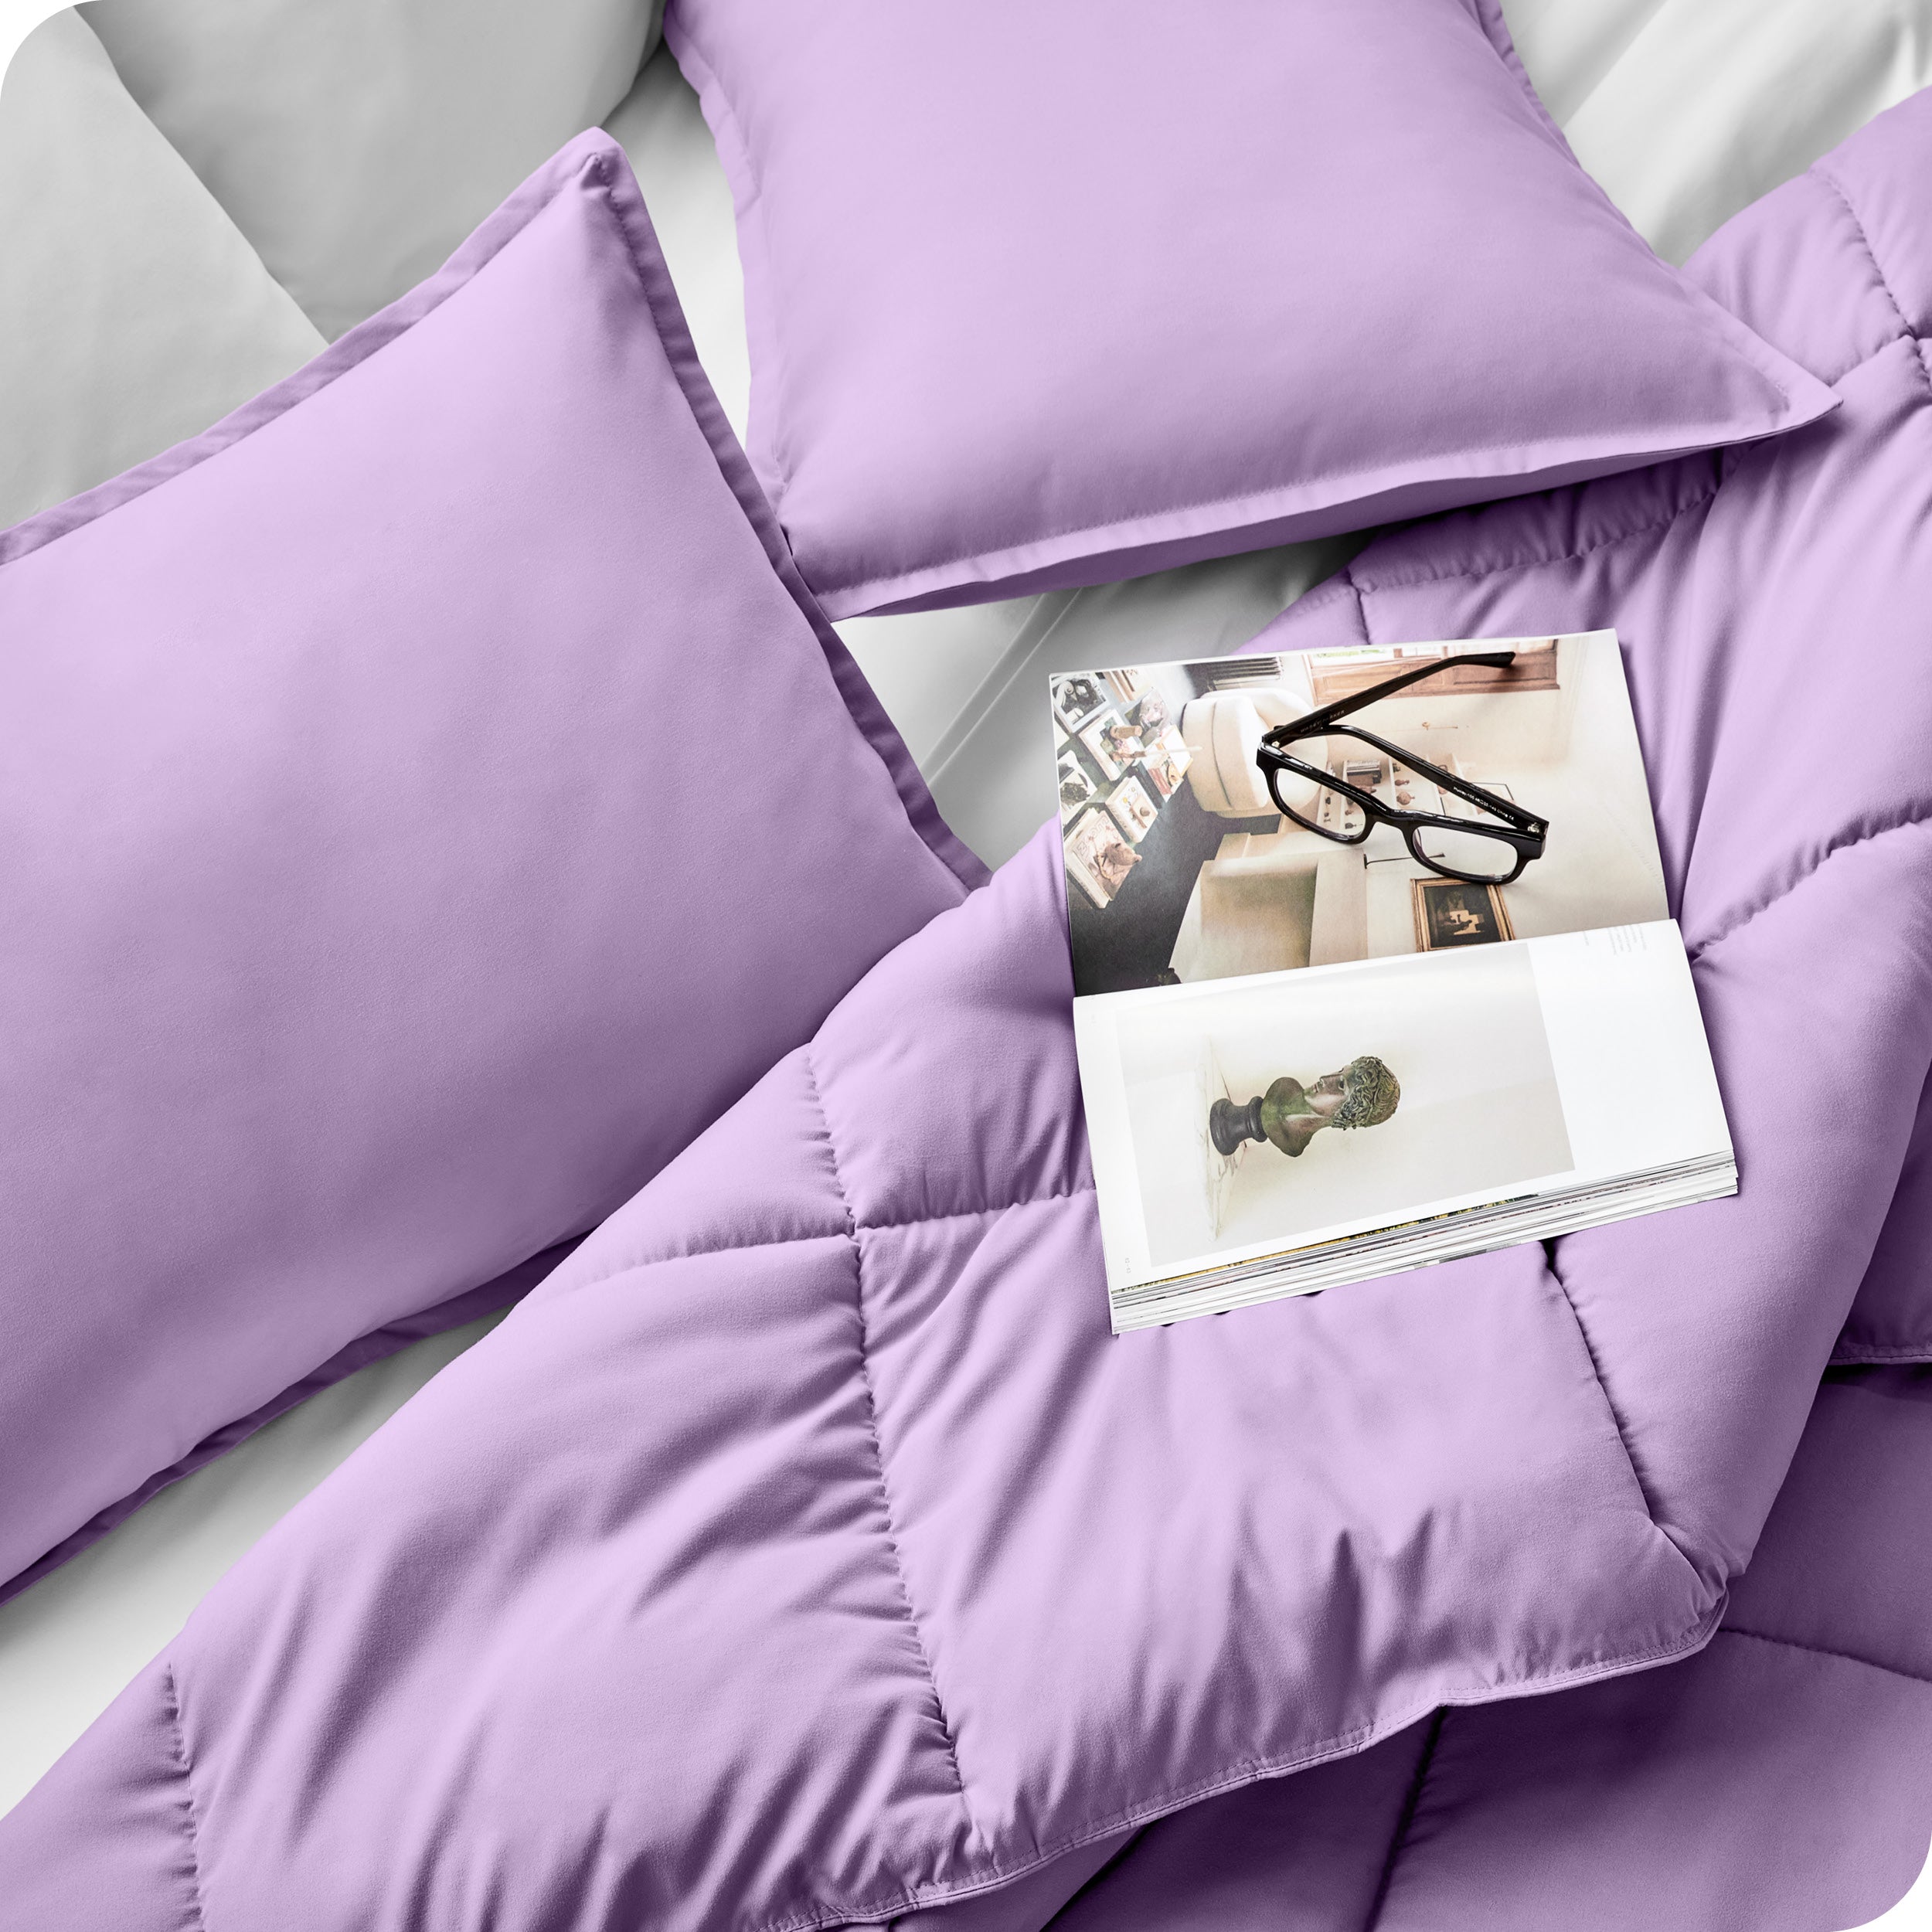 Close up of a comforter set on a bed. There are glasses and a magazine on top of the comforter.